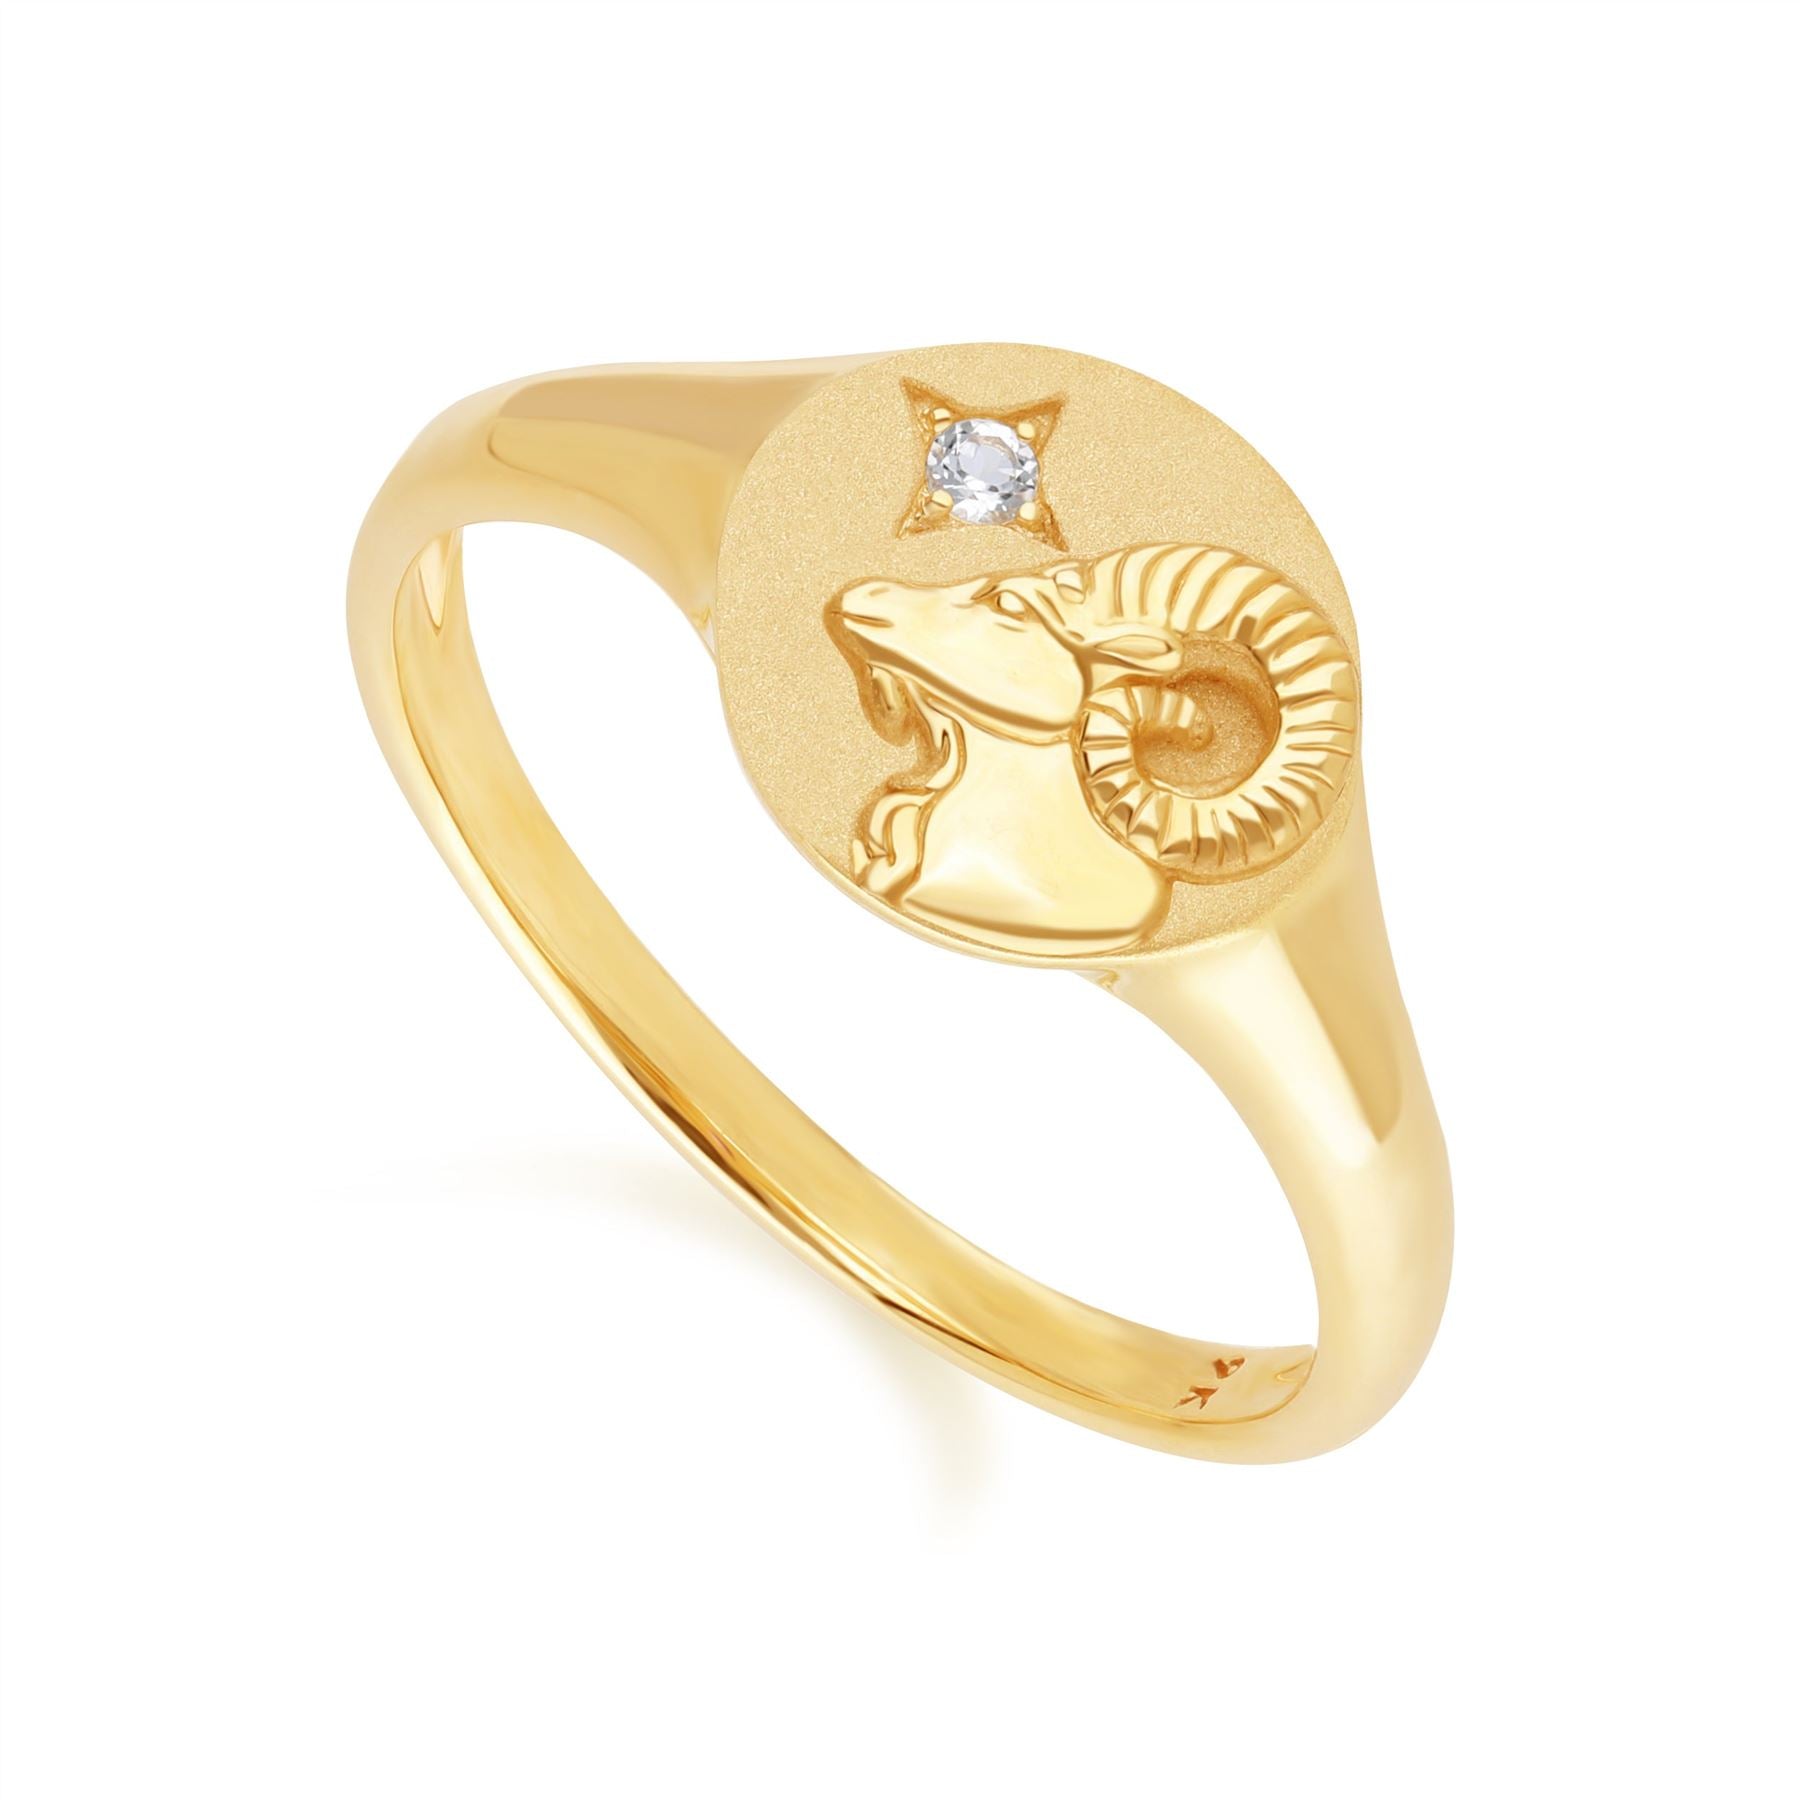 "Zodiac Topaz Aries Signet Ring In 9ct Yellow GoldSide  135R2082019